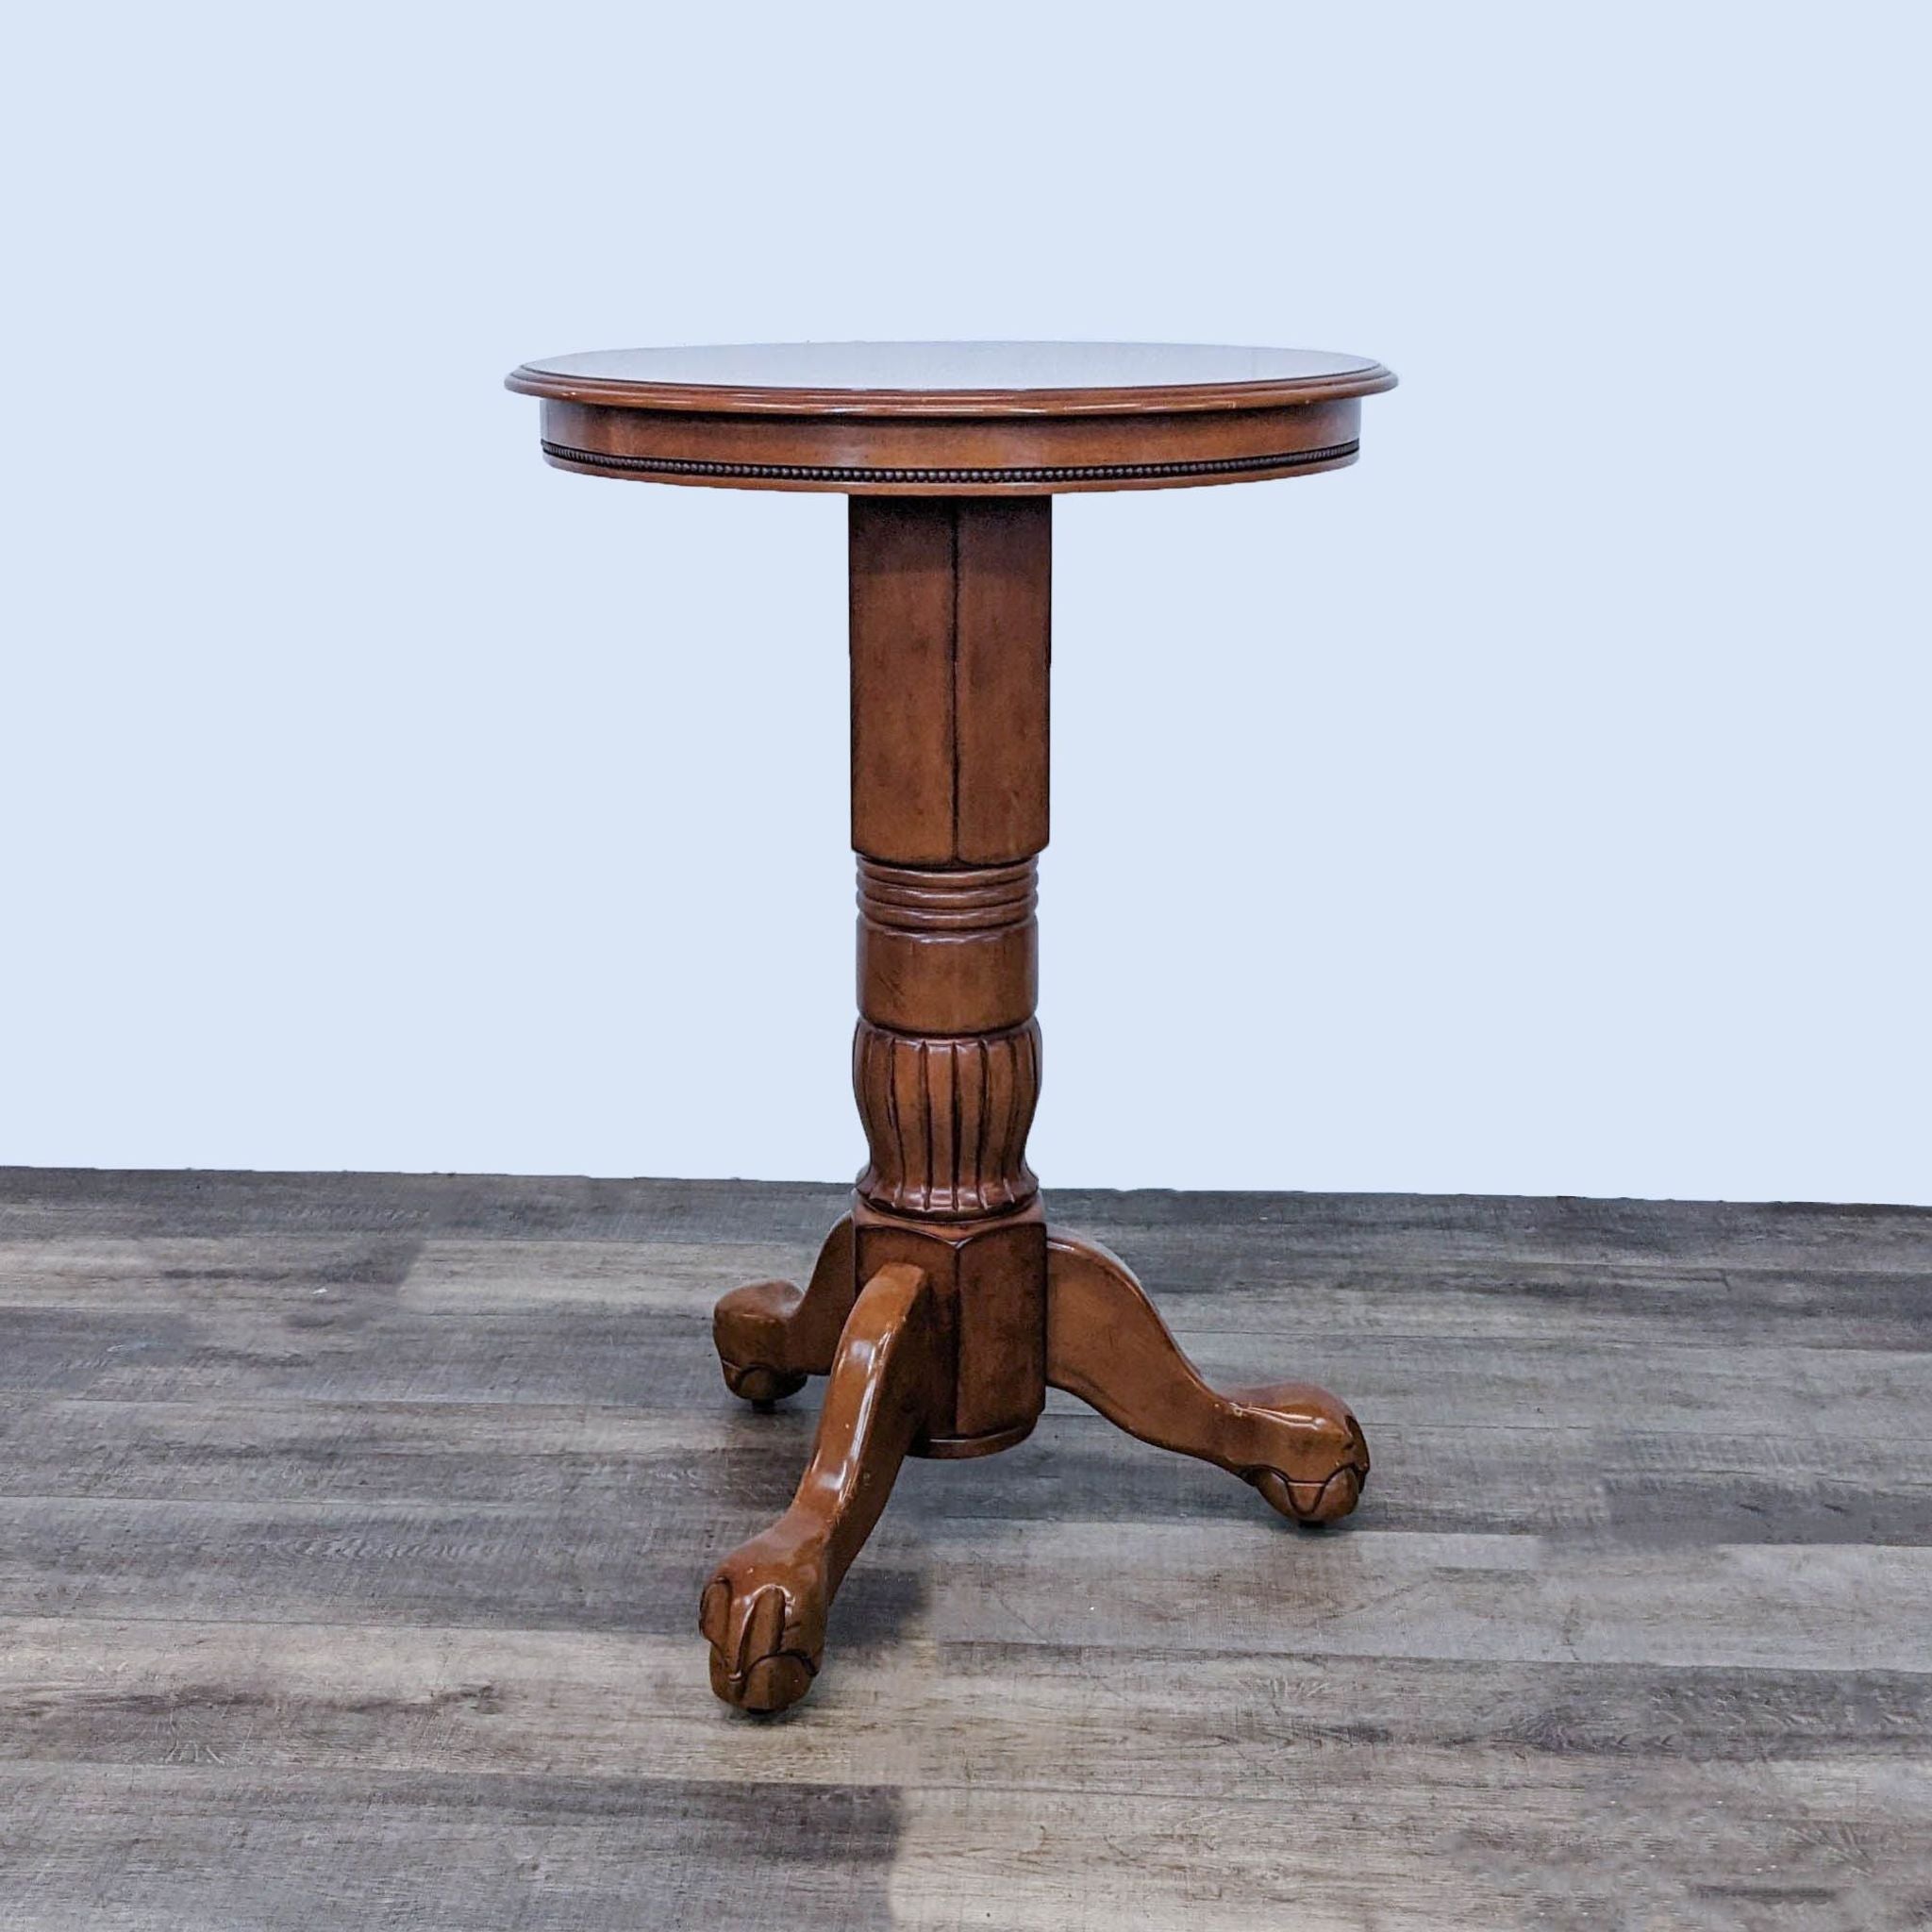 Round wood pin table with single pedestal base from Pier 1 Imports, part of a 3 piece counter height dining set.